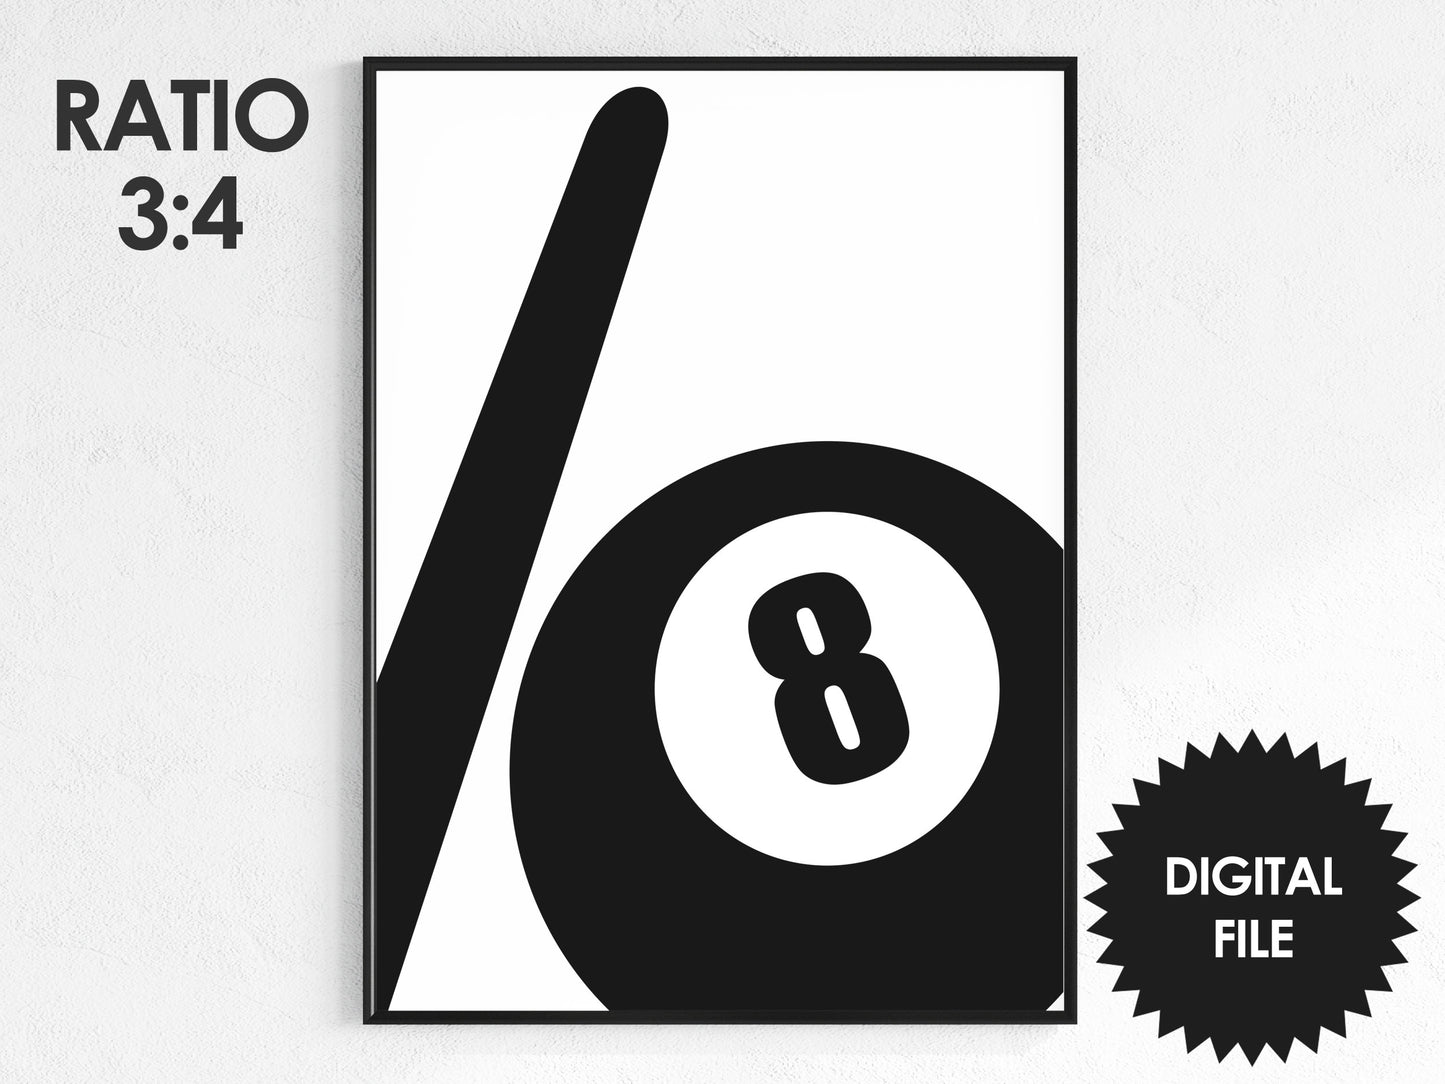 8 Ball Poster, Black & White, Instant Download JPG/PNG, Ratio 2x3 and 3x4, Print up to 13x20inch or 20x26inch